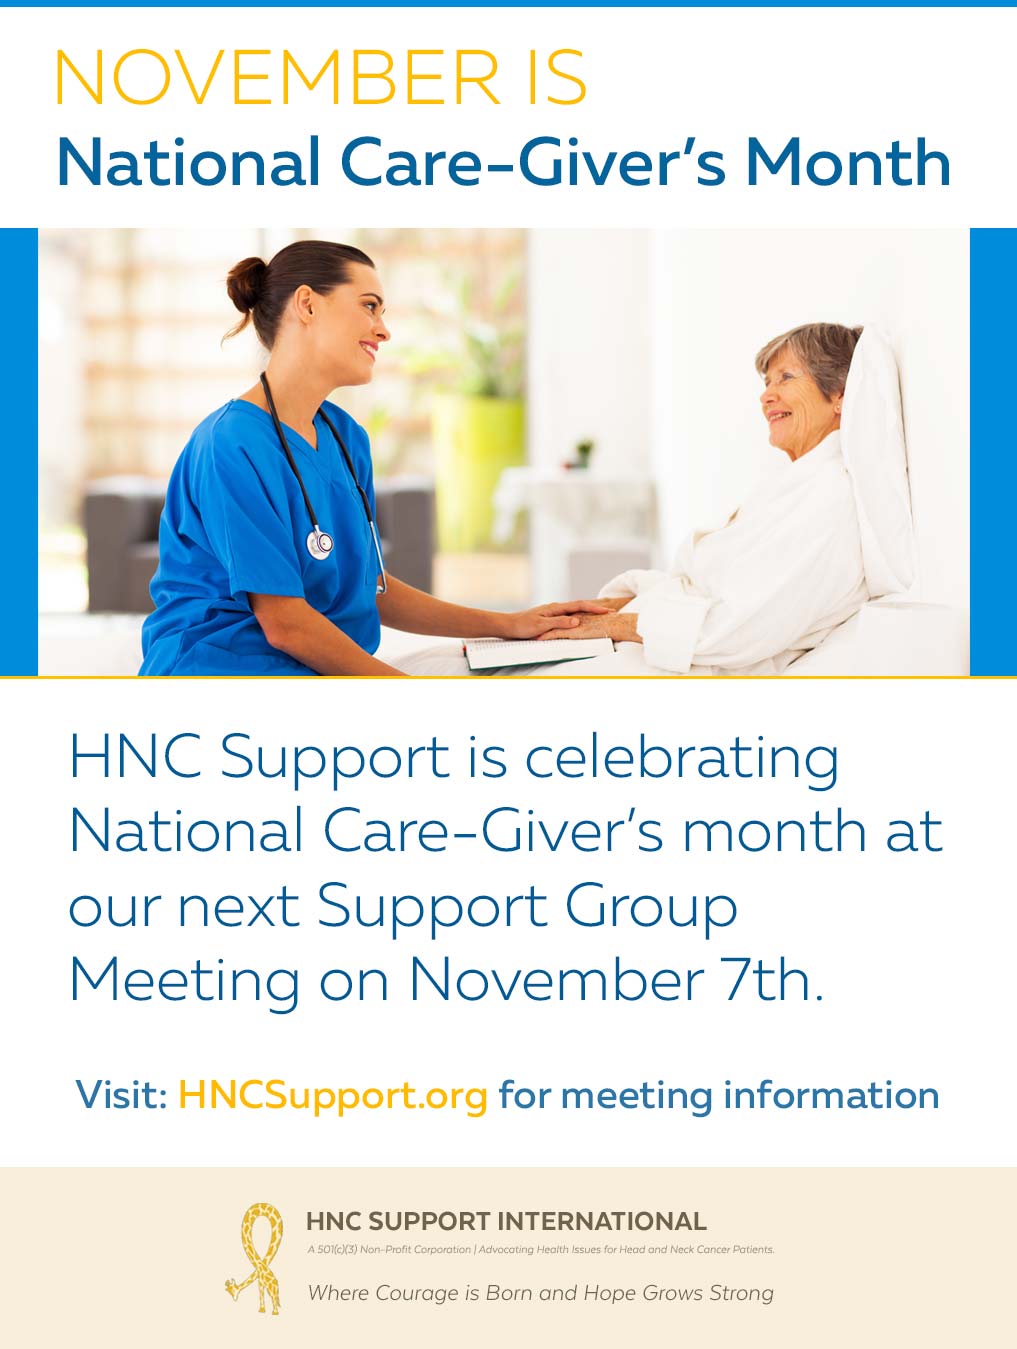 Notional Care-Giver's Month